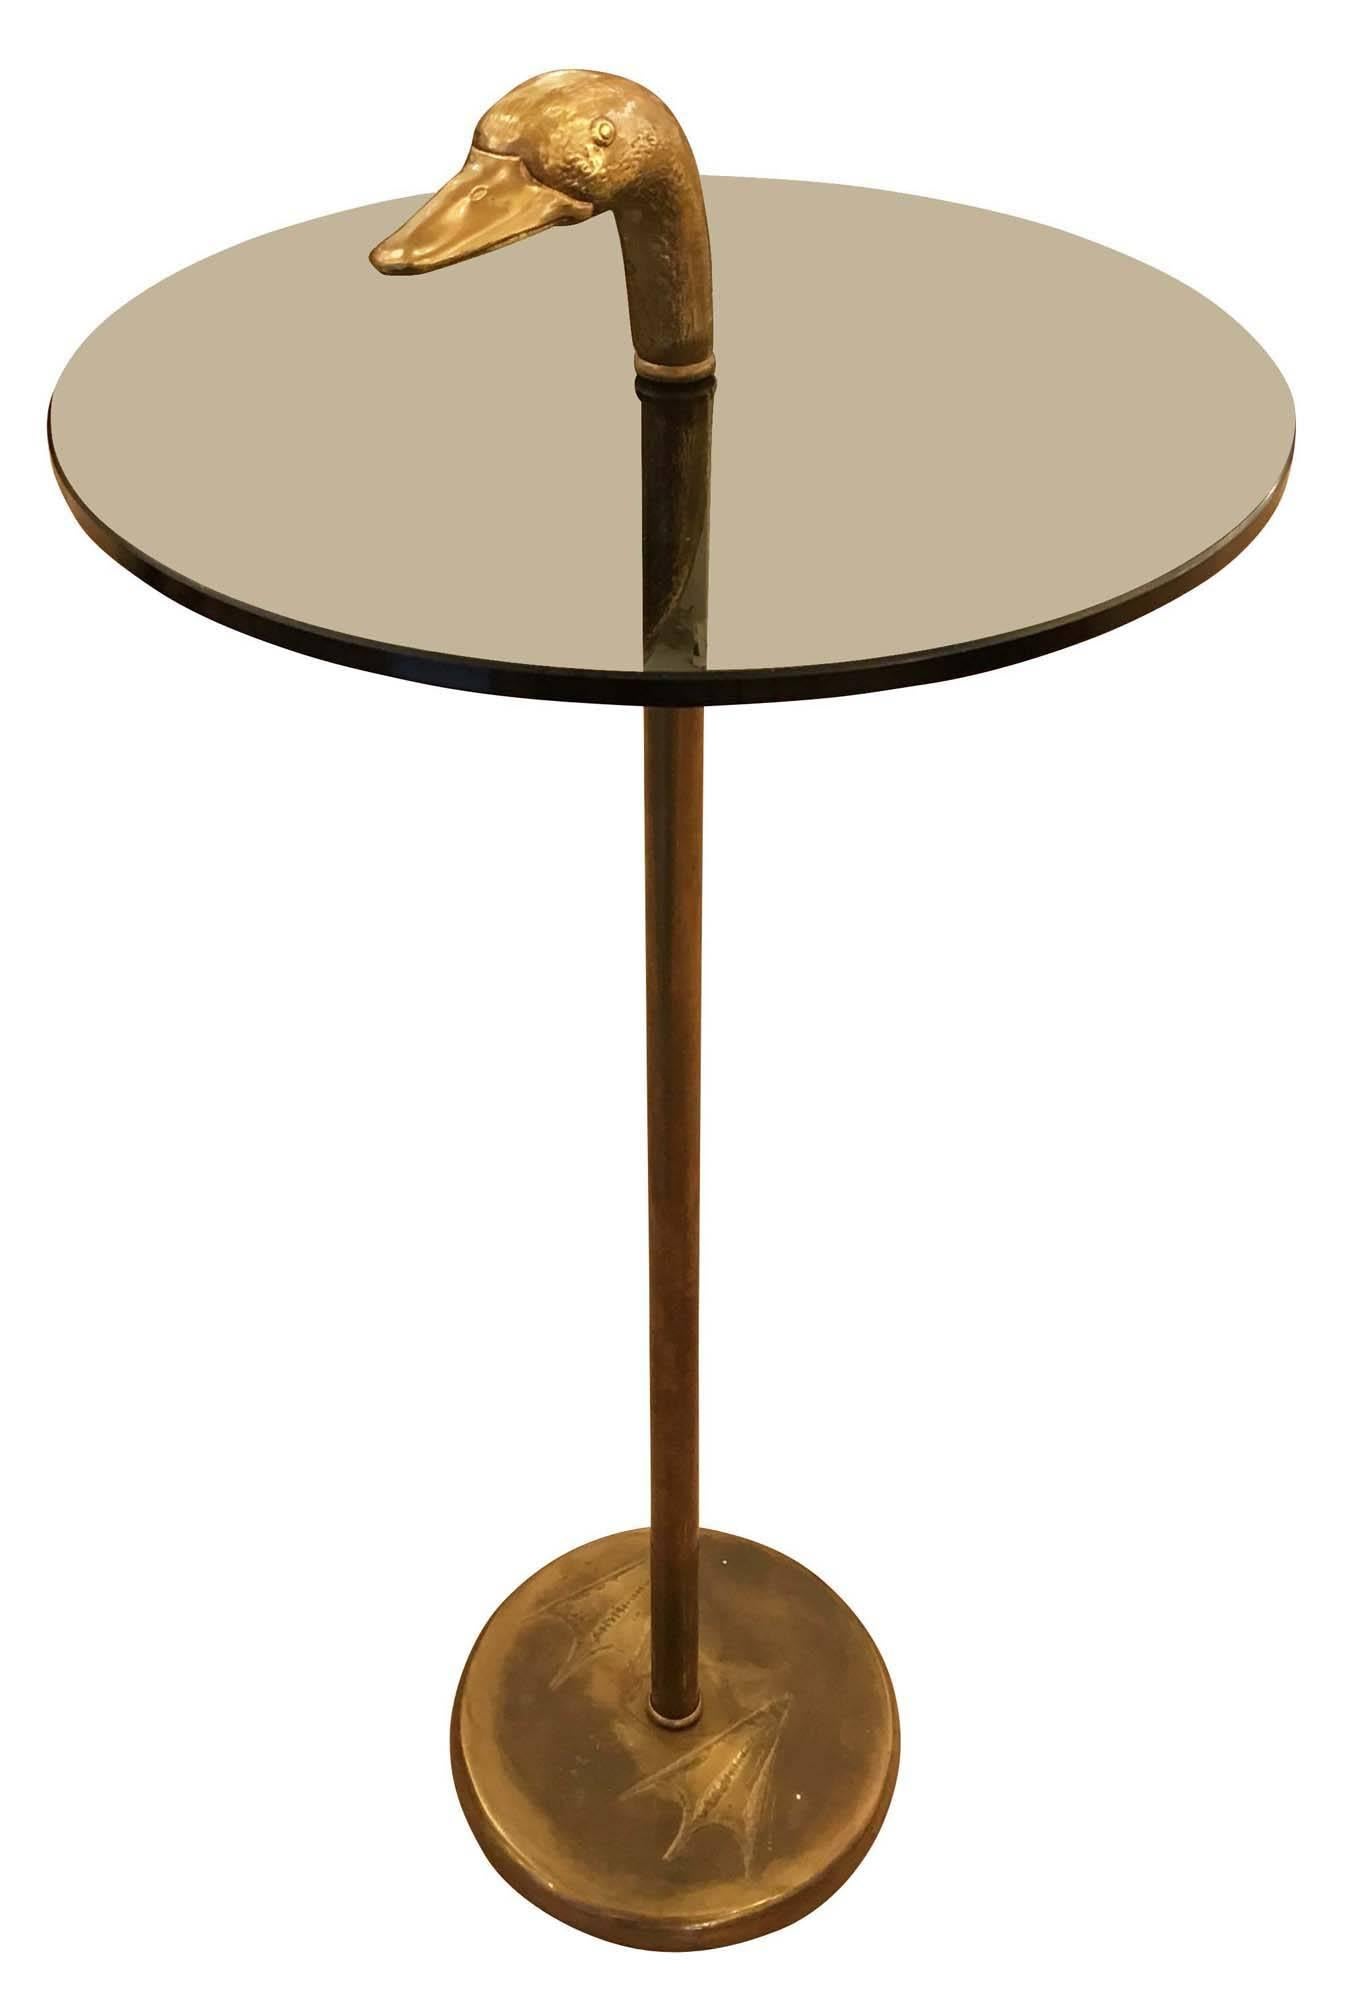 Duck themed side table by Banci, Firenze. The duck head and base with duck feet imprints are bronze while the center stem is brass. The glass is smoked. 
